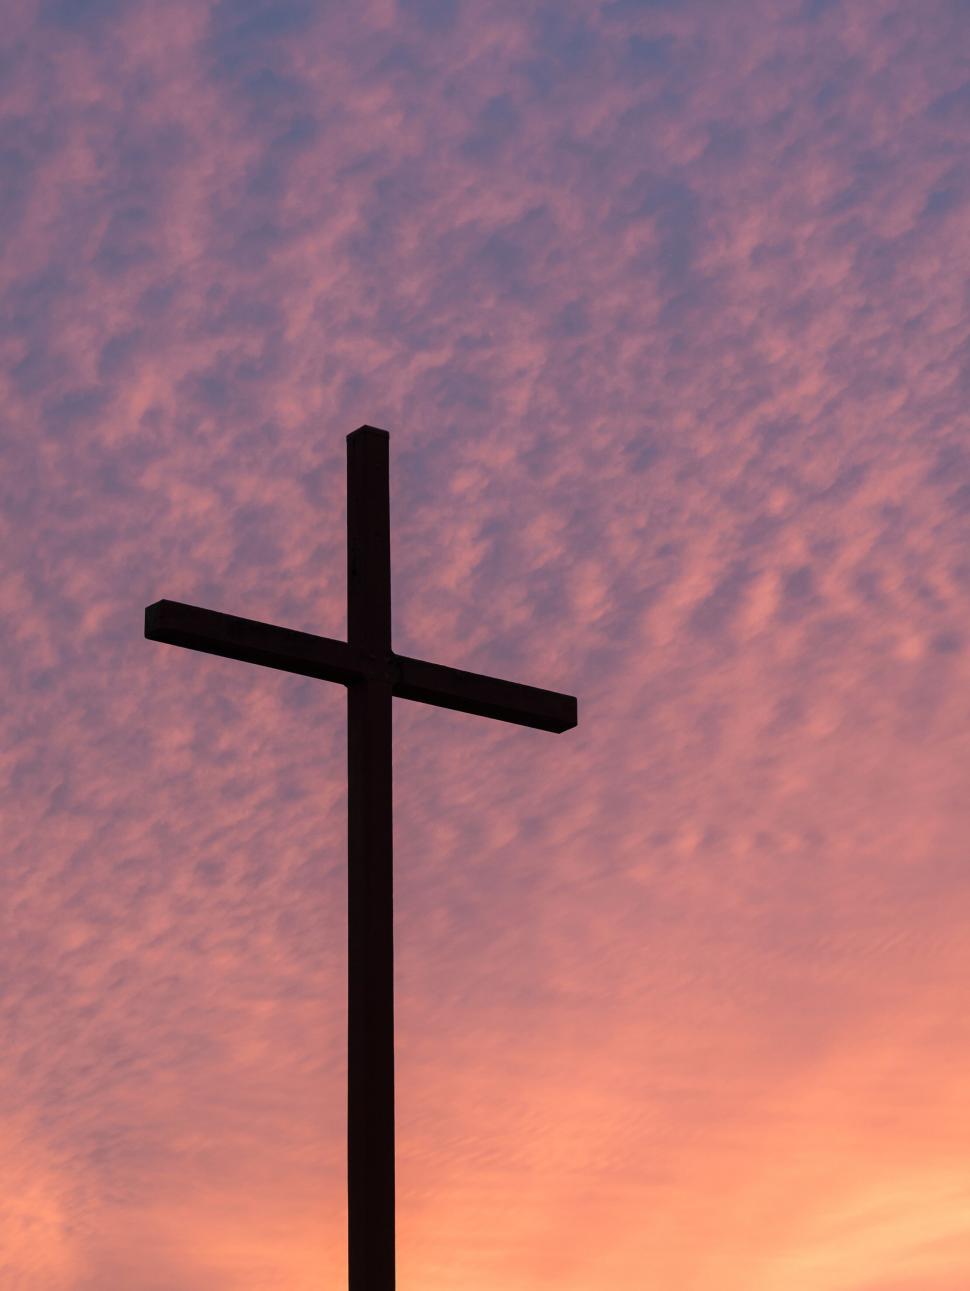 Free Image of A cross against a pink and purple sky 